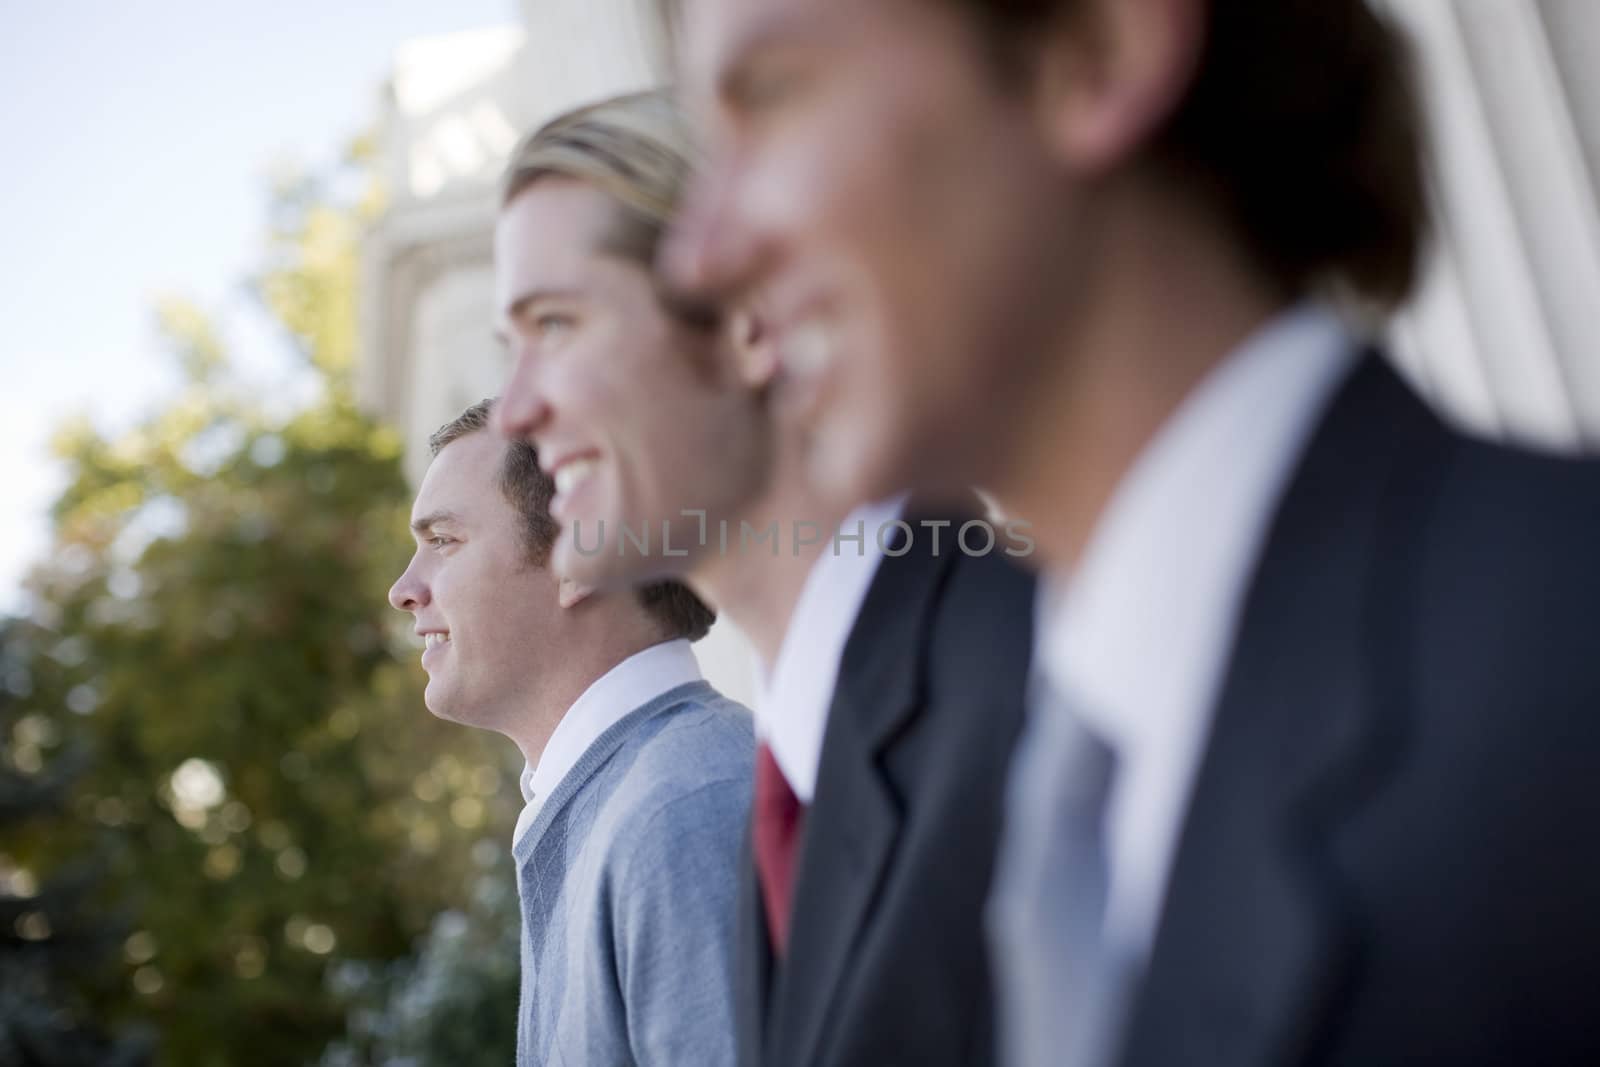 three business men standing and smiling in same direction